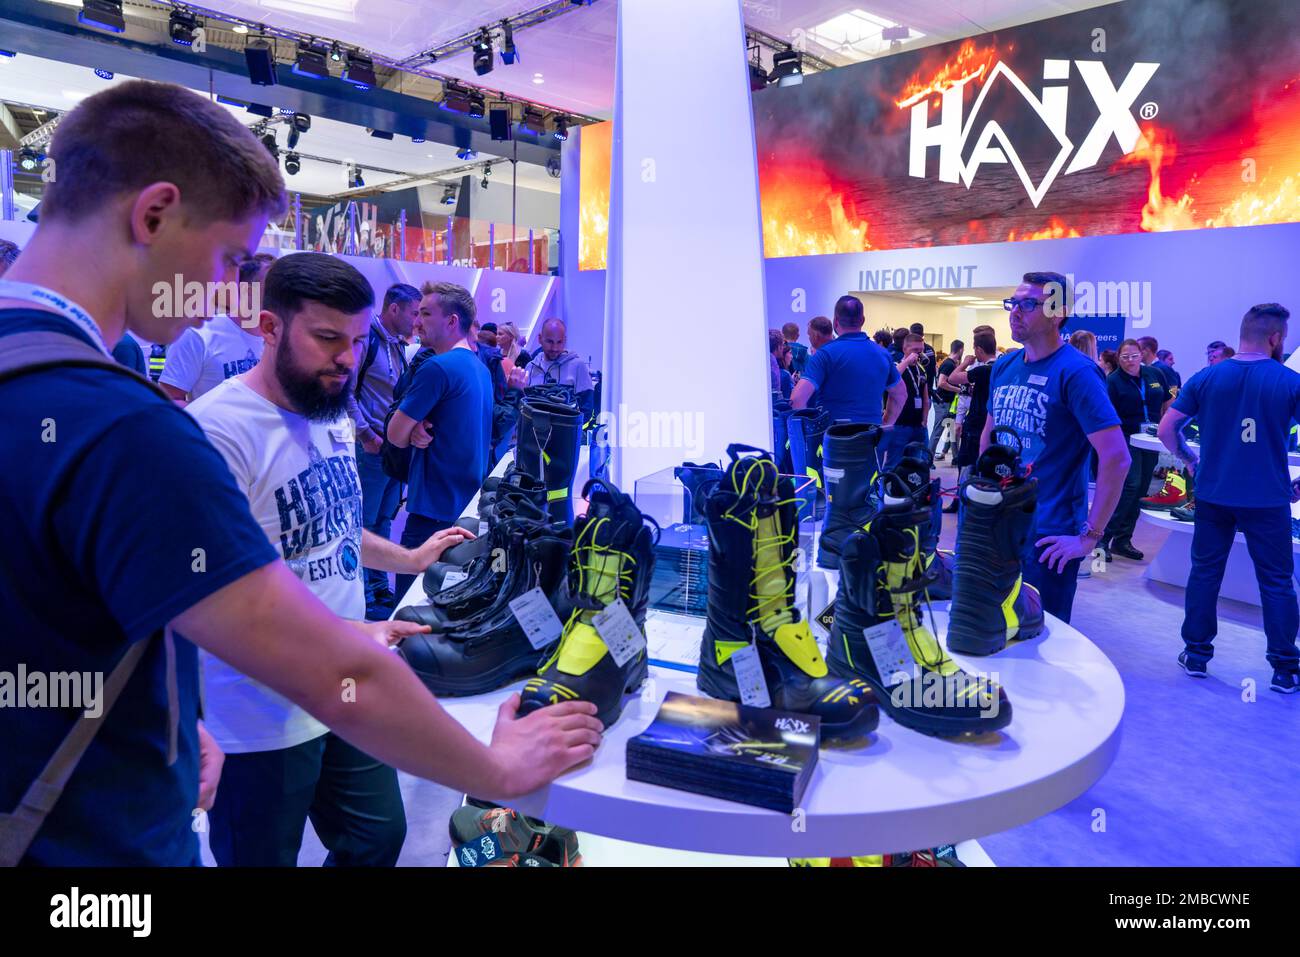 Personal protective equipment, clothing for firefighters, Interschutz 2022 trade fair in Hanover, the world's largest trade fair for firefighting, res Stock Photo